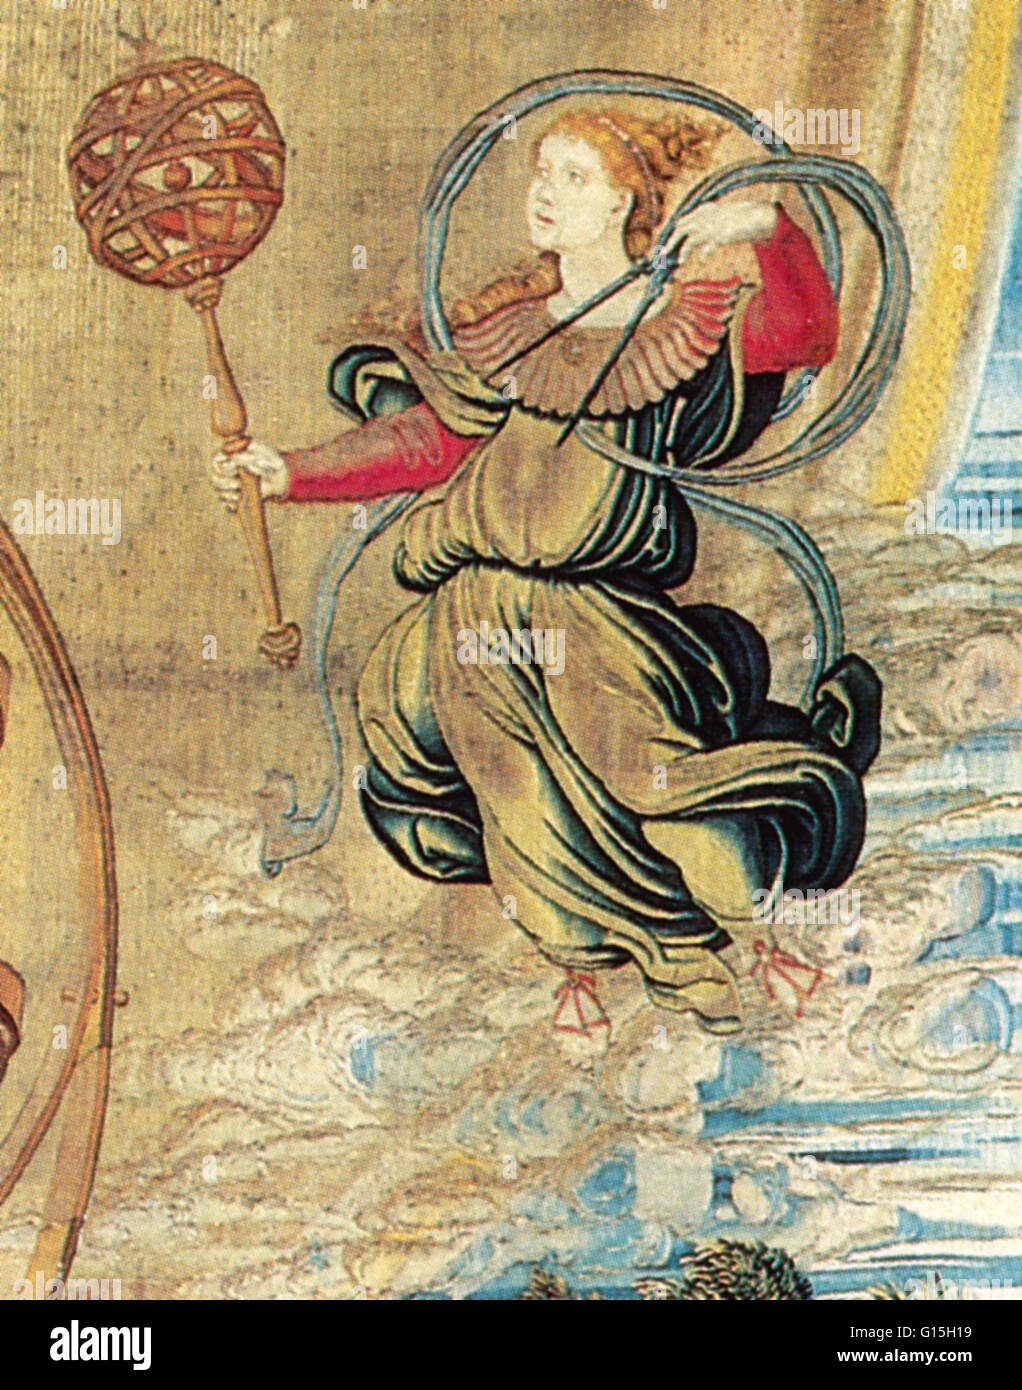 Detail of the tapestry 'Atlas Supporting the Armillary Sphere,' ca. 1530, by George Wezeler, Brussels, Belgium. For the full tapestry, see image no. BS4748. Stock Photo